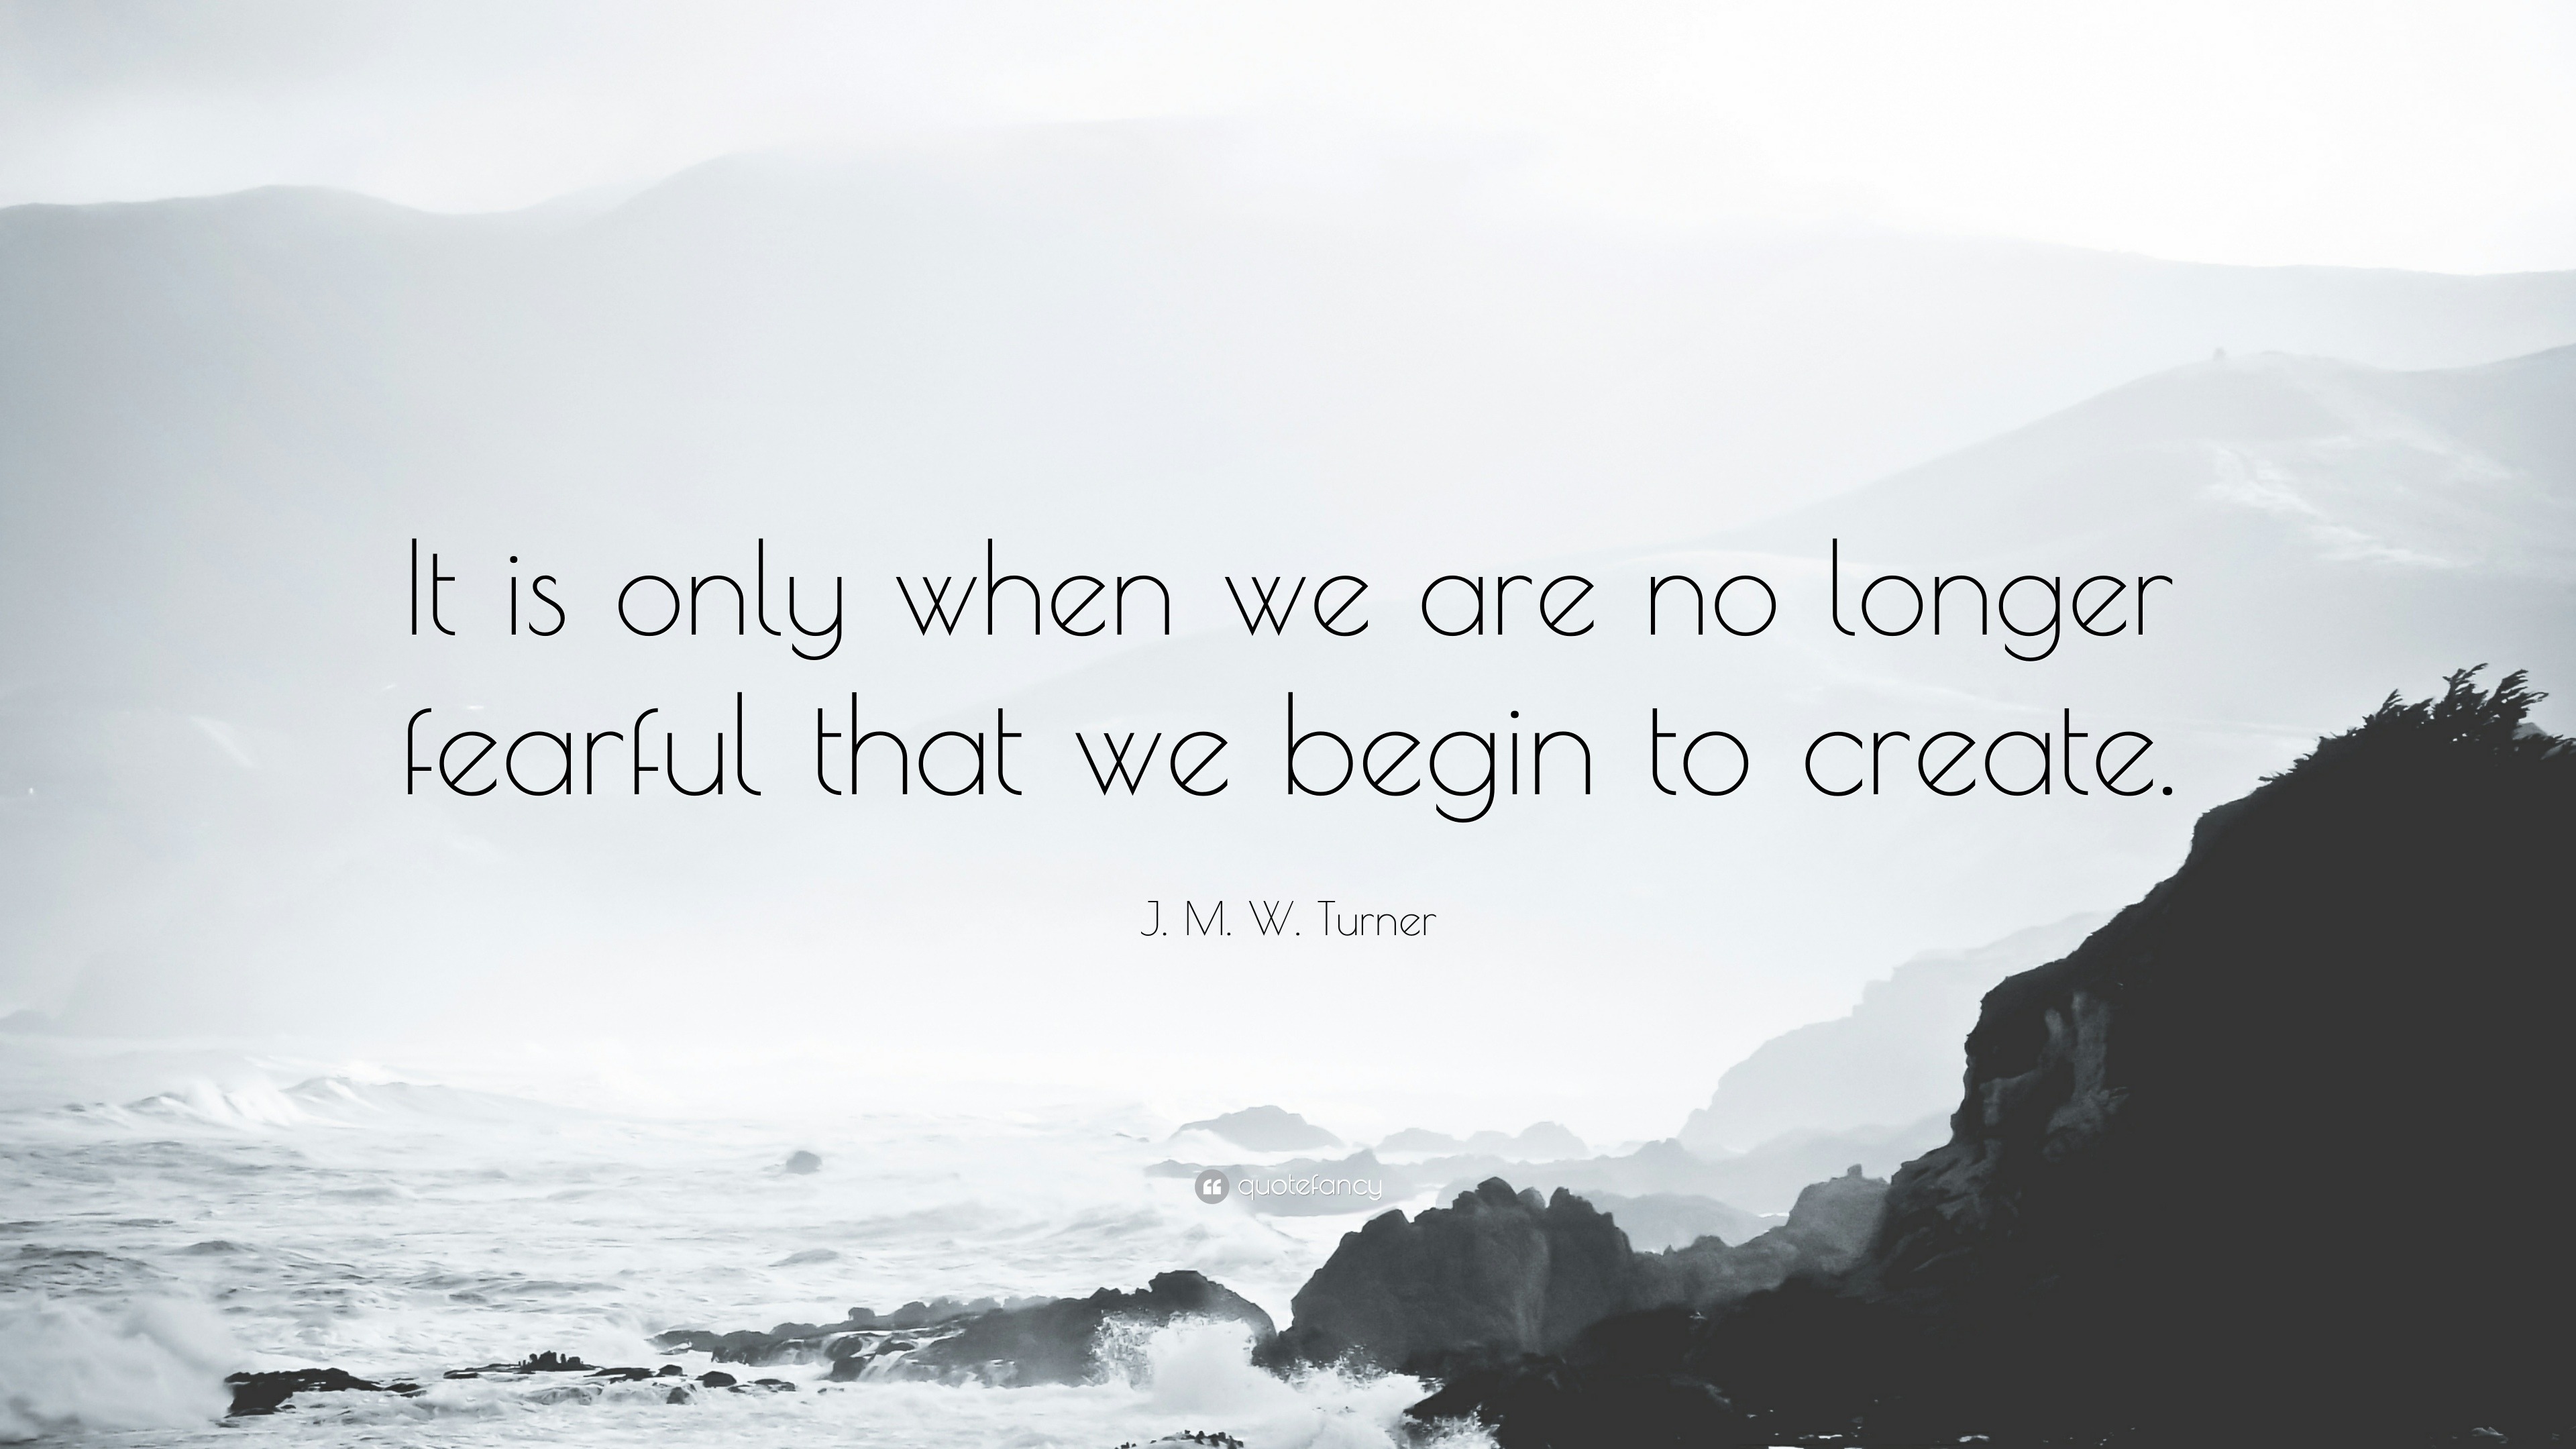 J M W Turner Quote It Is Only When We Are No Longer Fearful Images, Photos, Reviews